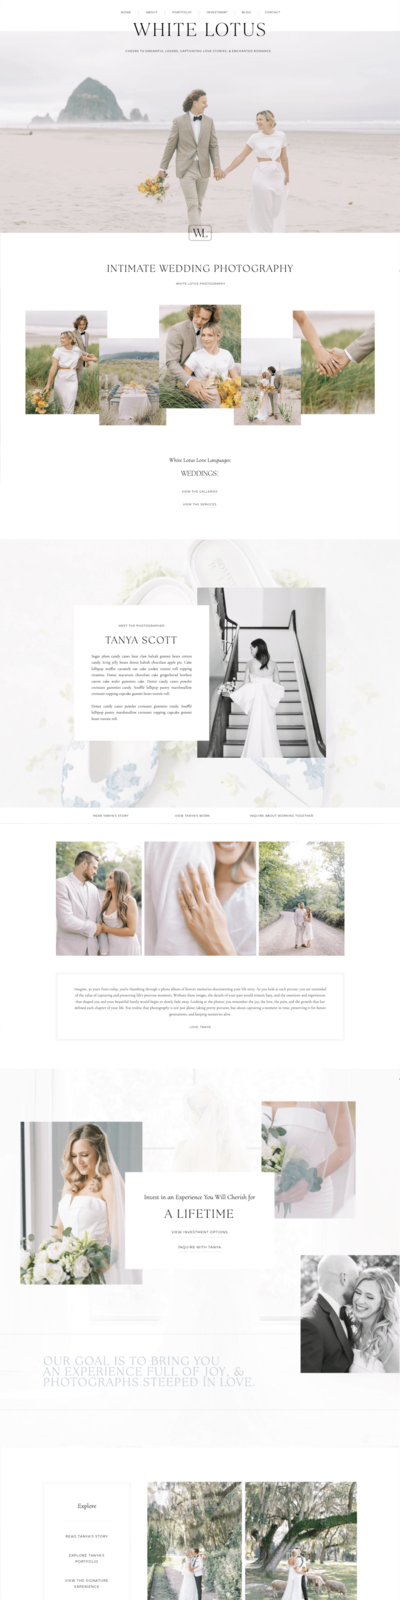 White Lotus Showit website template for photographers and creatives.